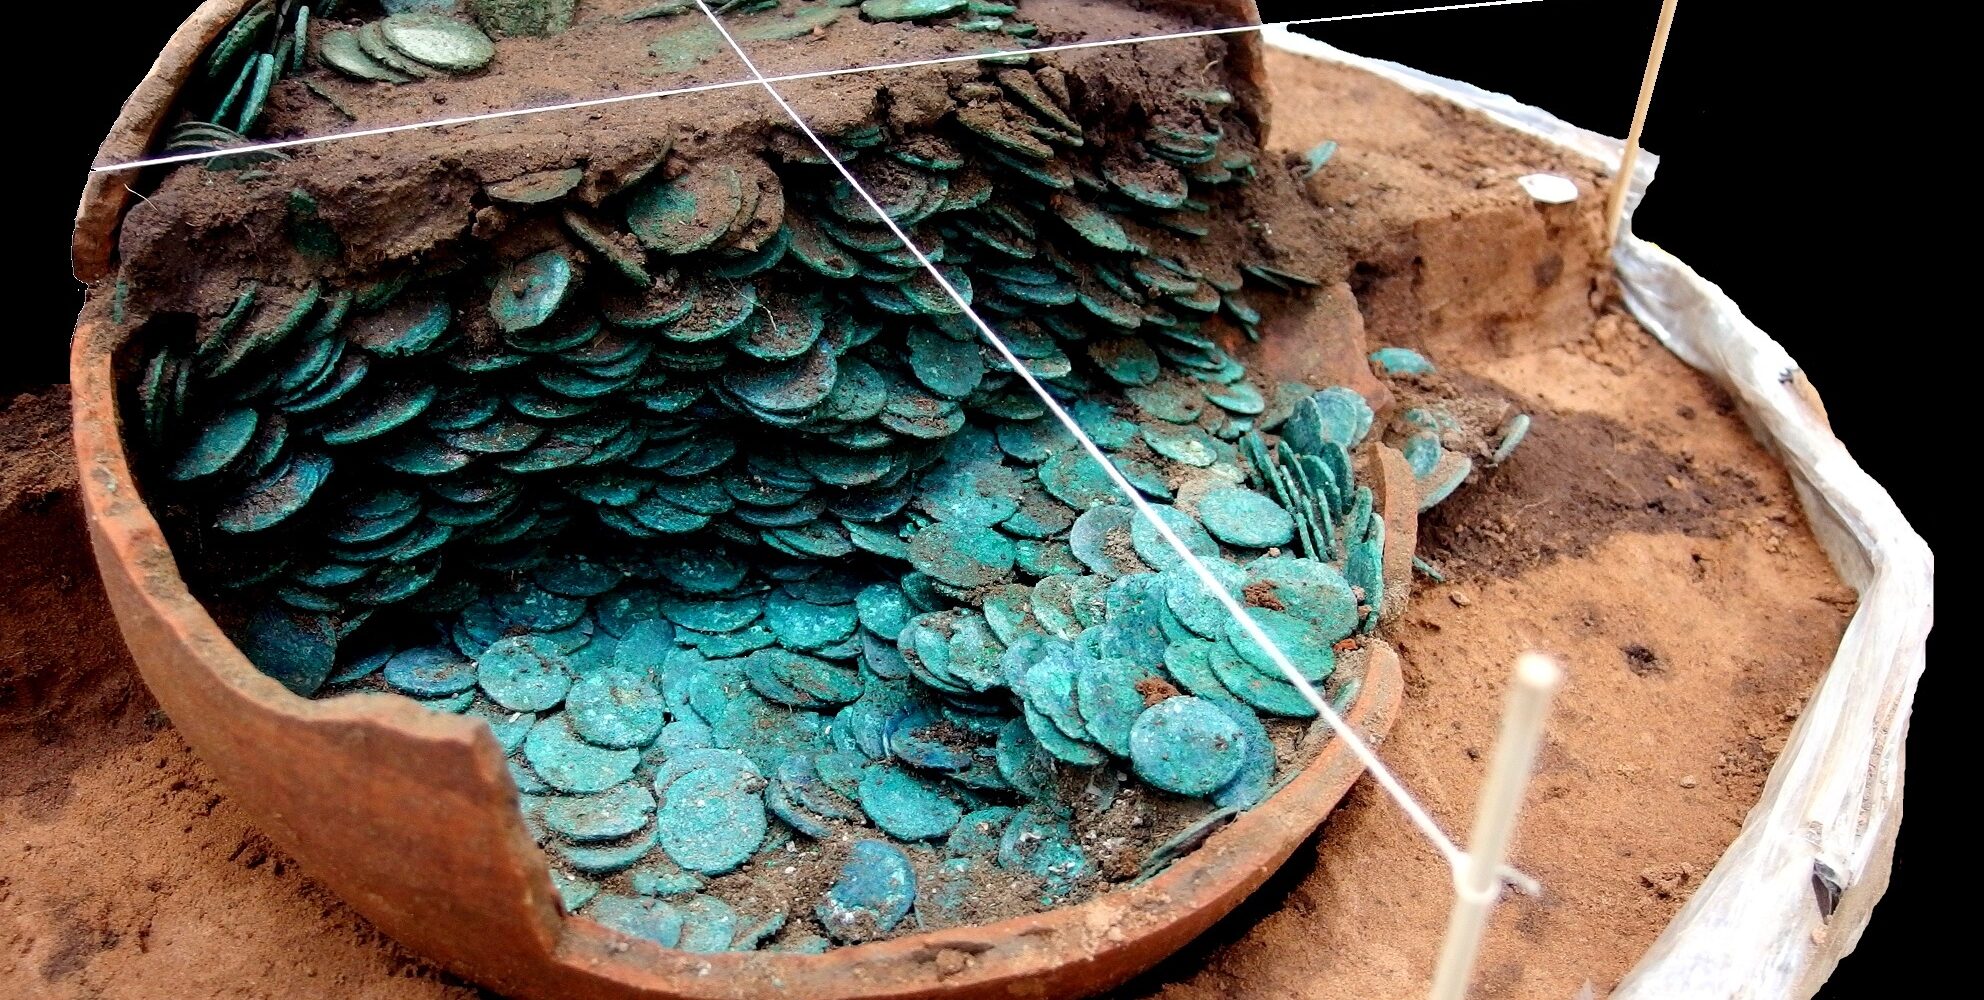 A photograph of the Peover Hoard being excavated